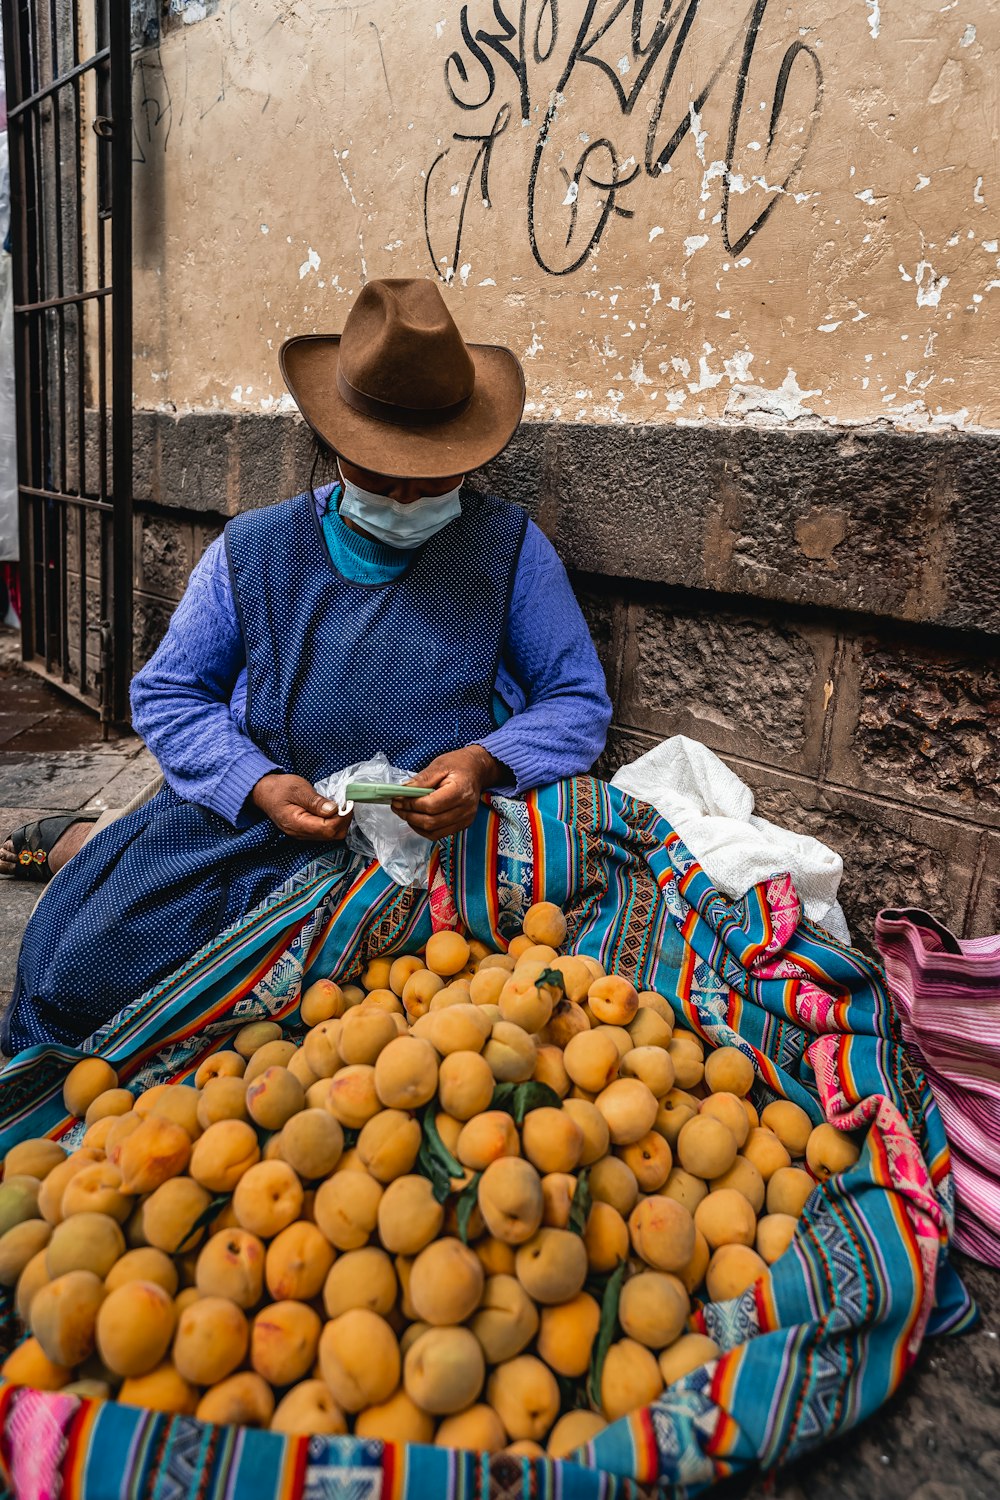 a person selling oranges